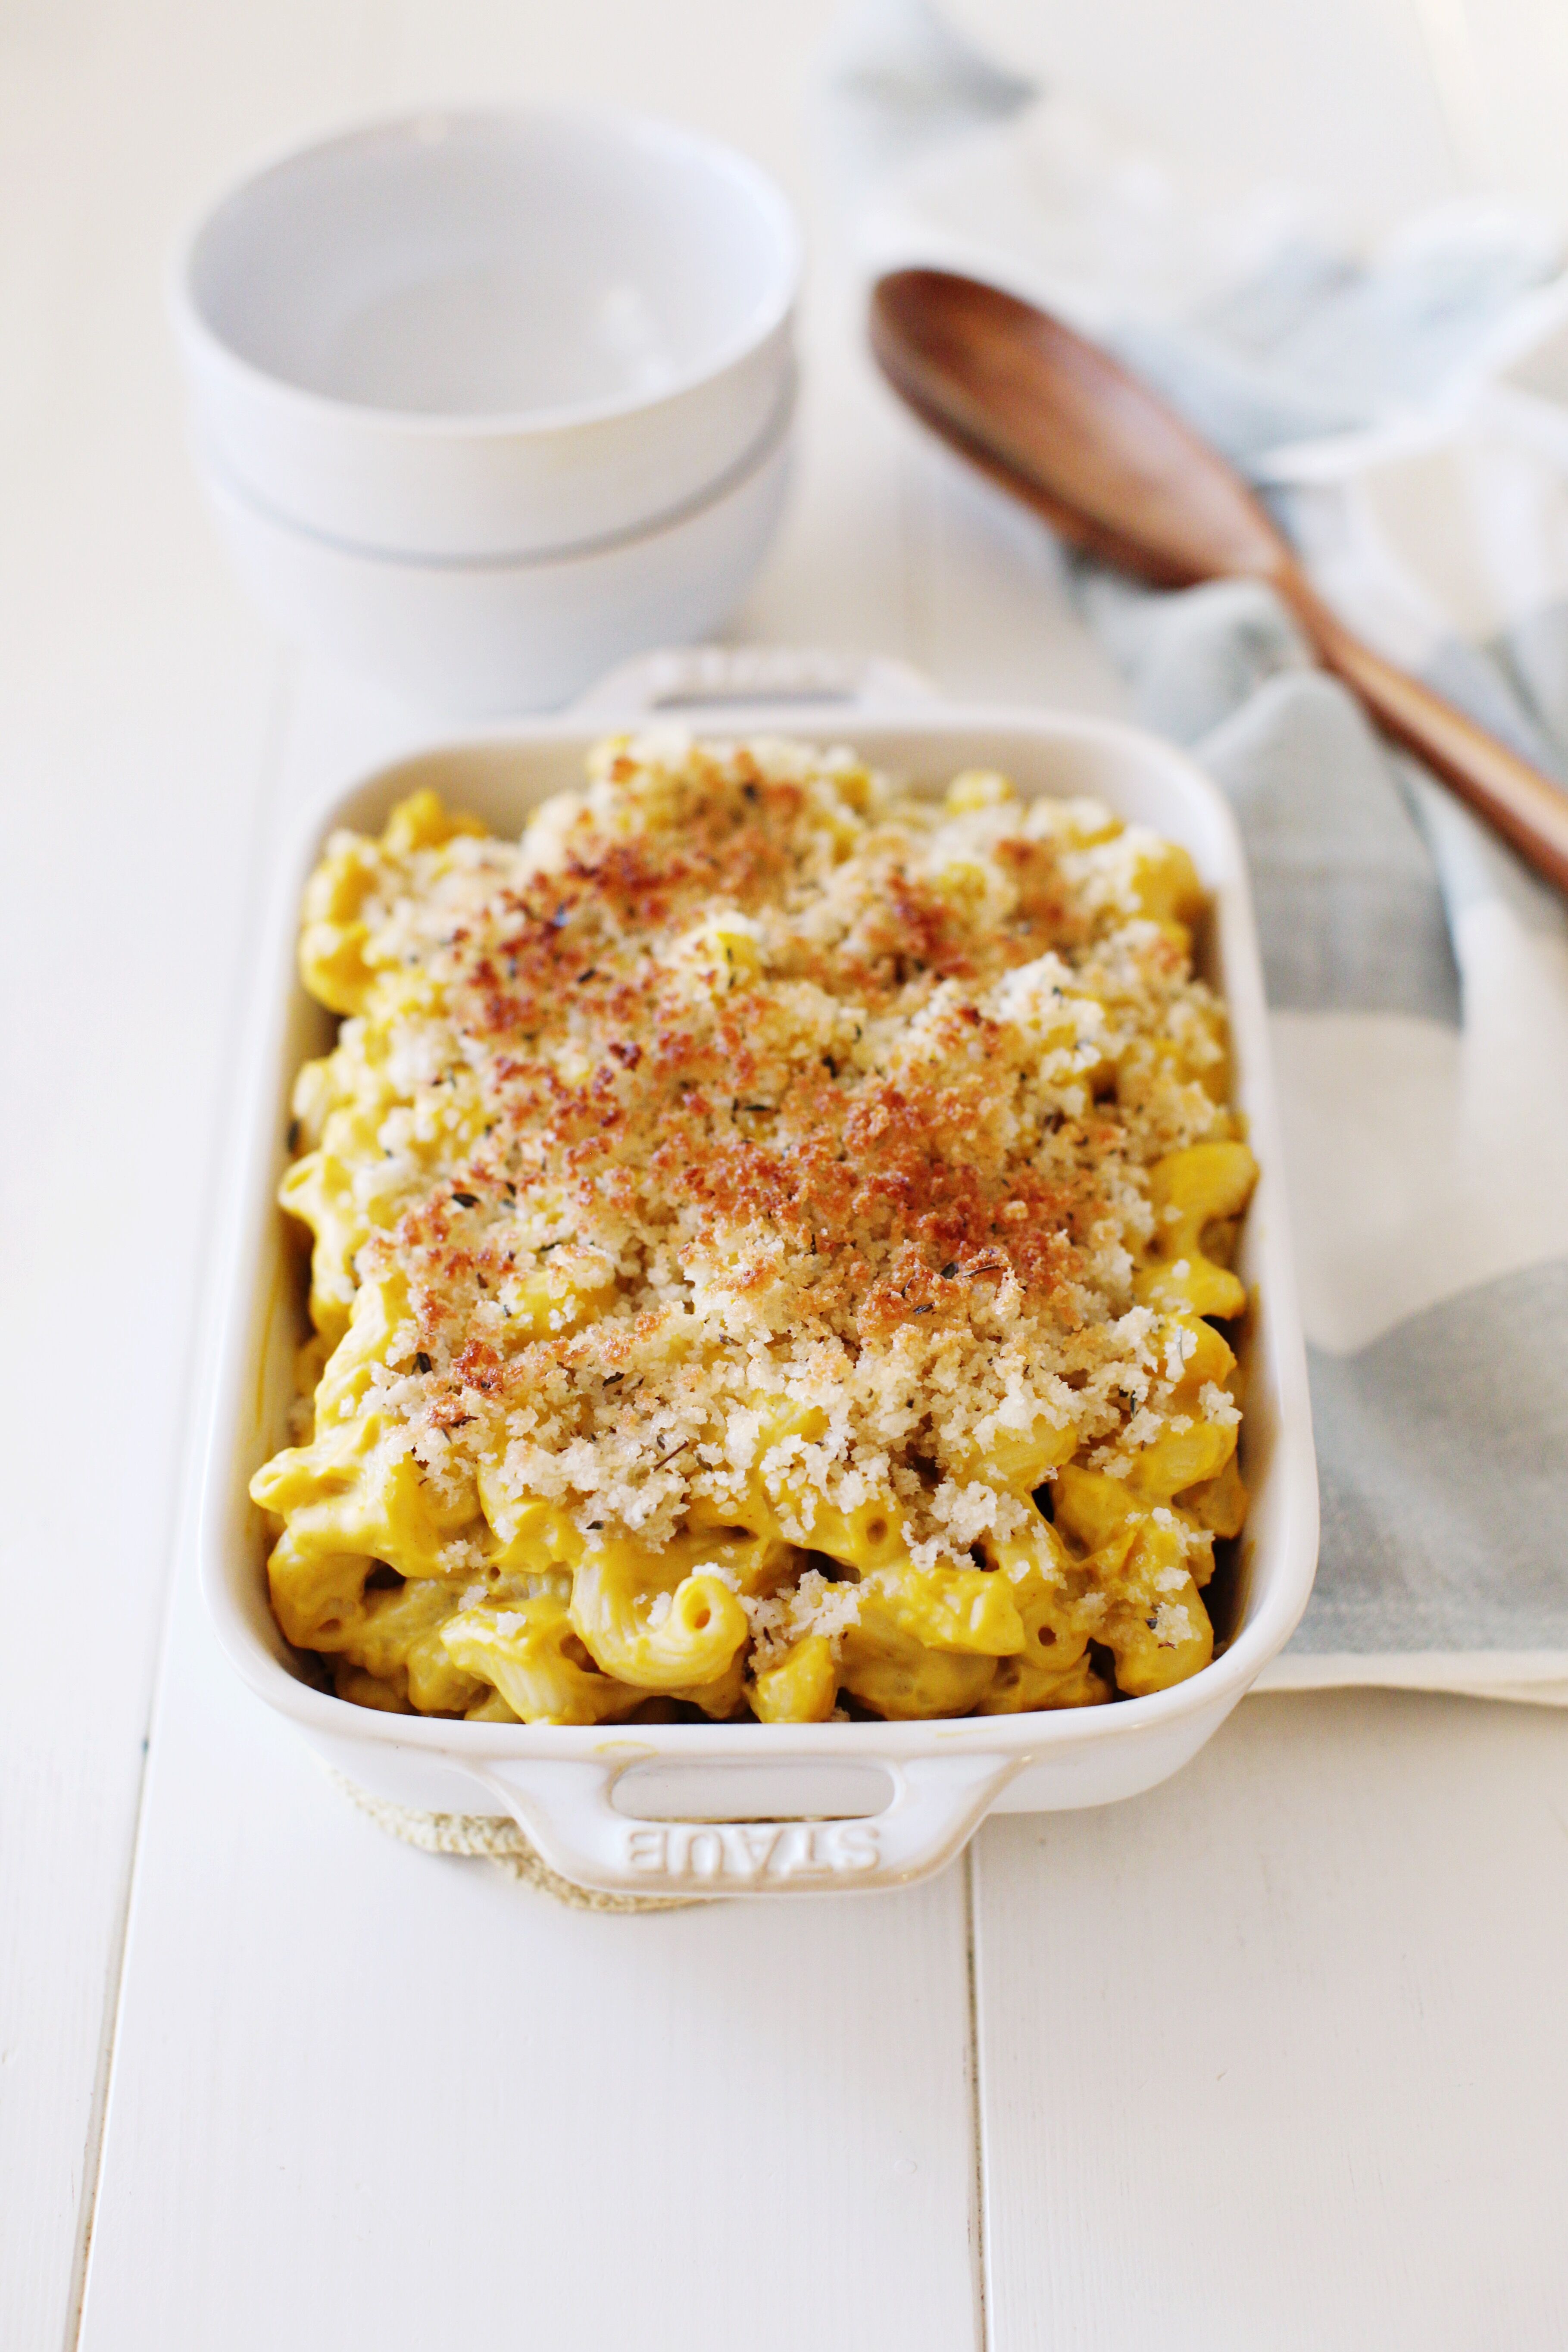 Vegan Mac n' cheese made with butternut squash, caramelized onions and cashews that is totally to die for - designed by a dietitian and so much more nutritious than regular Mac n cheese!